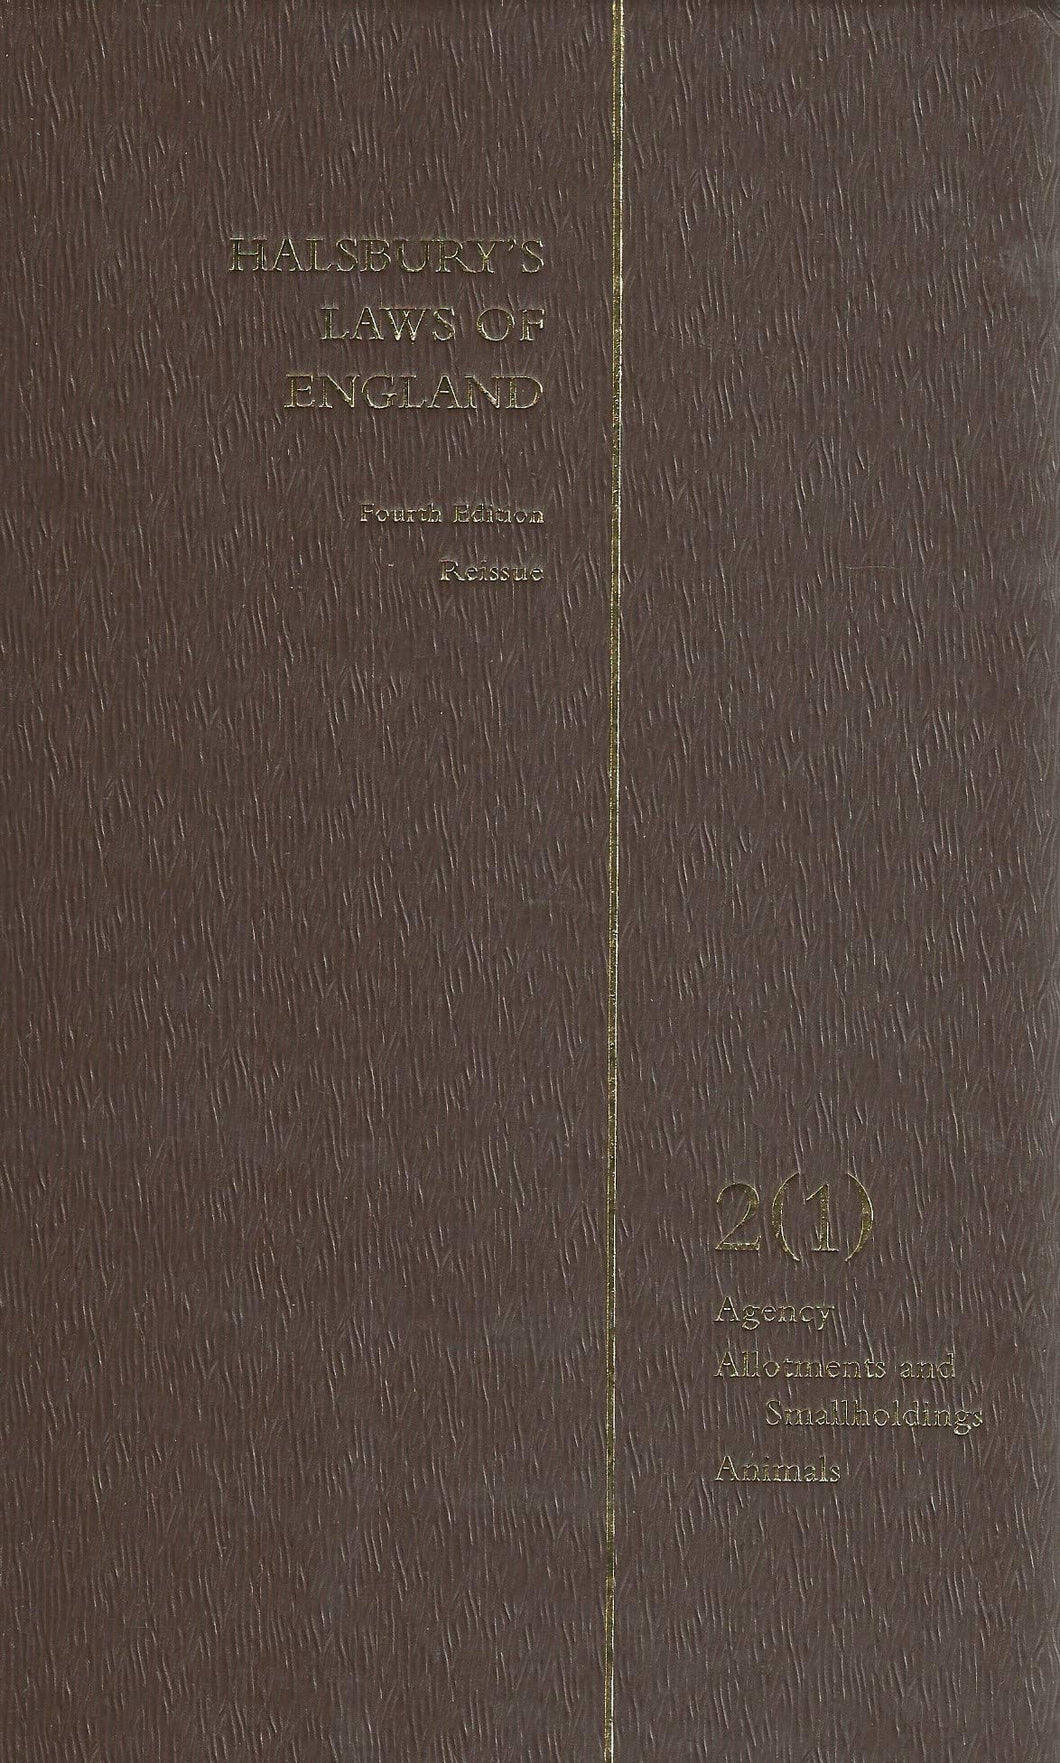 Halsbury s Laws of England. Fourth Edition Reissue. Volume 2 (1). Agency, Allotments and Smallholdings, Animals.